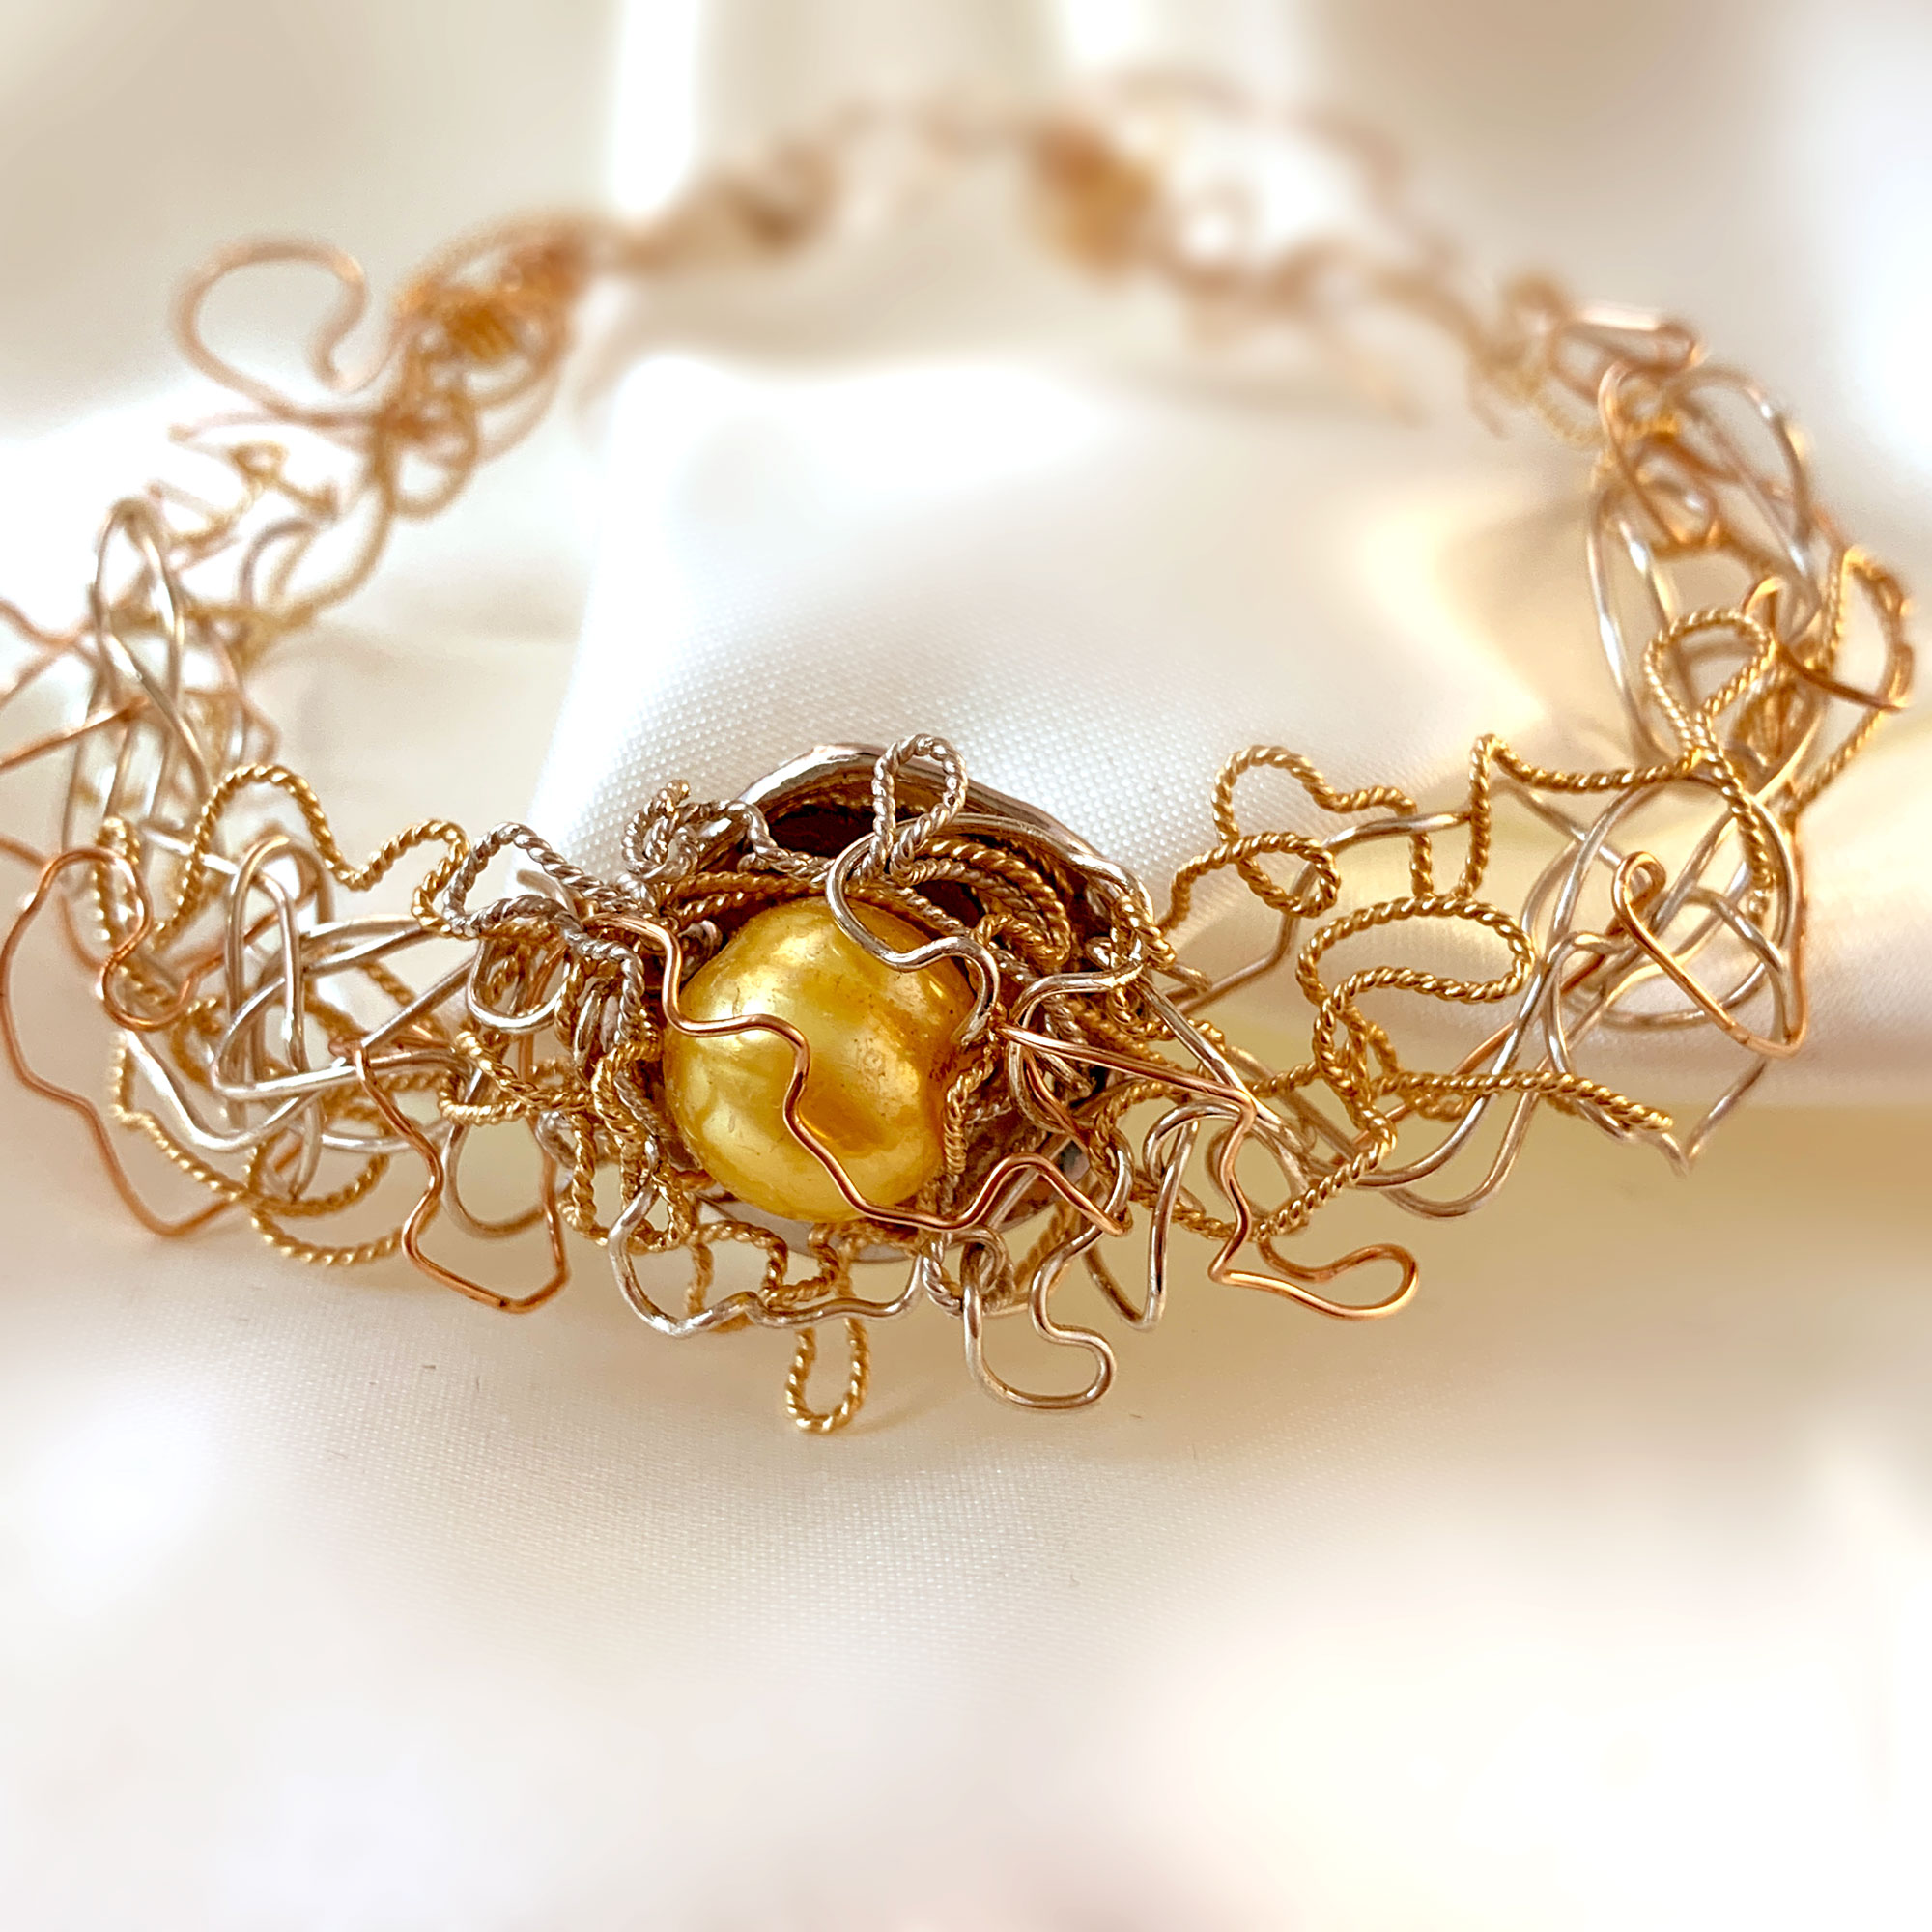 'Lux' 'Golden touch' Intricate Bracelet